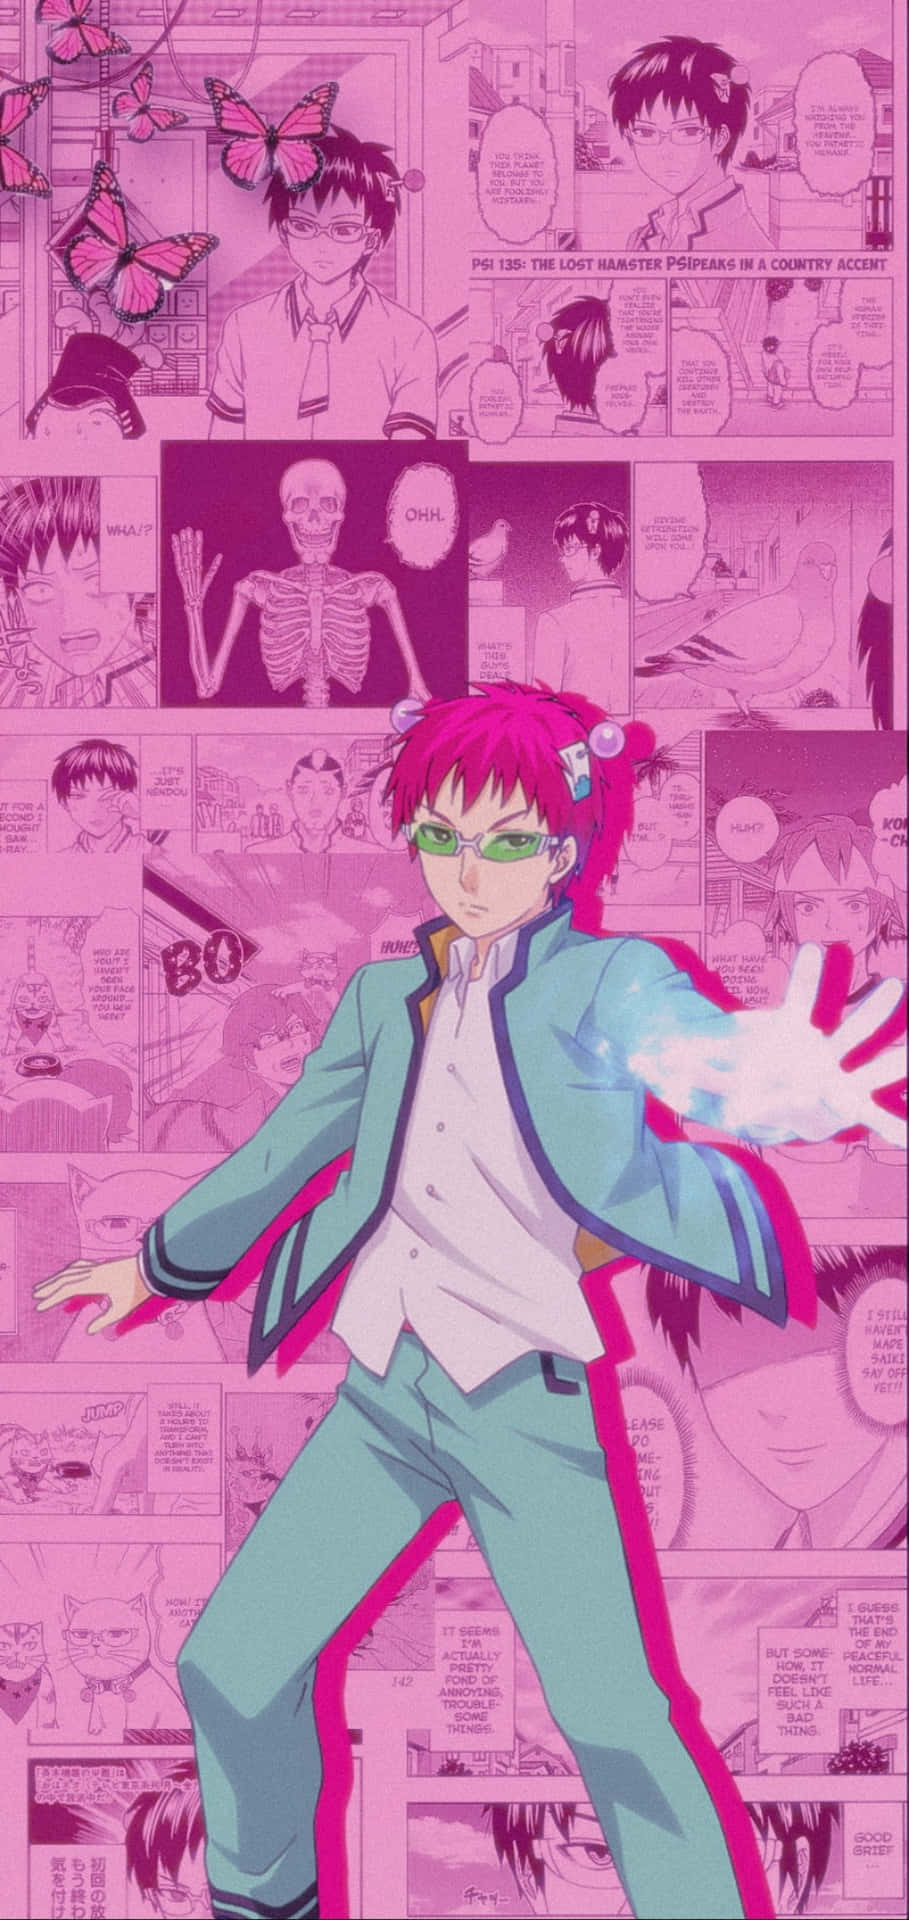 The Disastrous Life of Saiki K. 'Conclusion' Anime Reveals New Teaser  Visual - News - Anime News Network